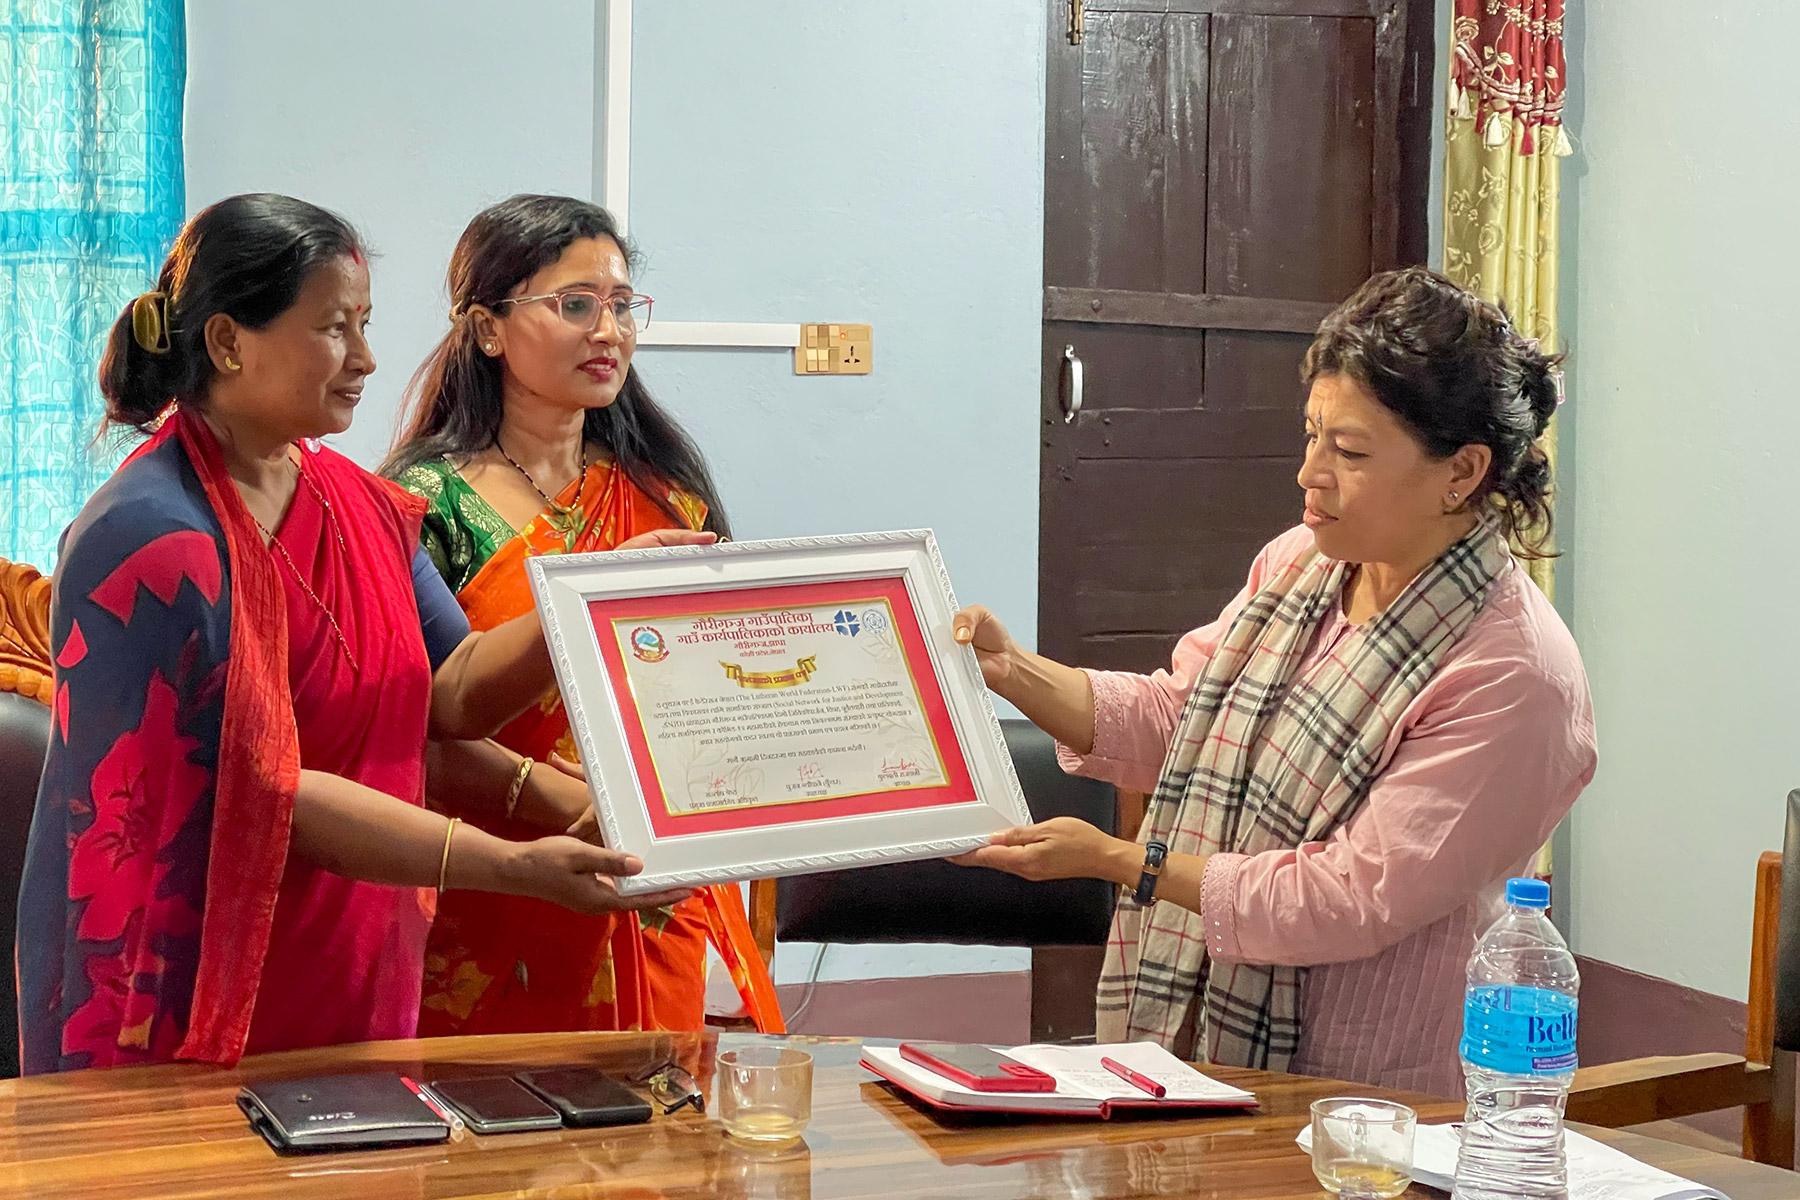 LWF Nepal Country Representative Dr. Bijaya Bajracharya (right) receives an appreciation letter from the leaders of the local government. The letter was issued by the local government and appreciates the collaboration with LWF and its local partner organization SNJD in Jhapa district. Photo: LWF/ Y. Gautam